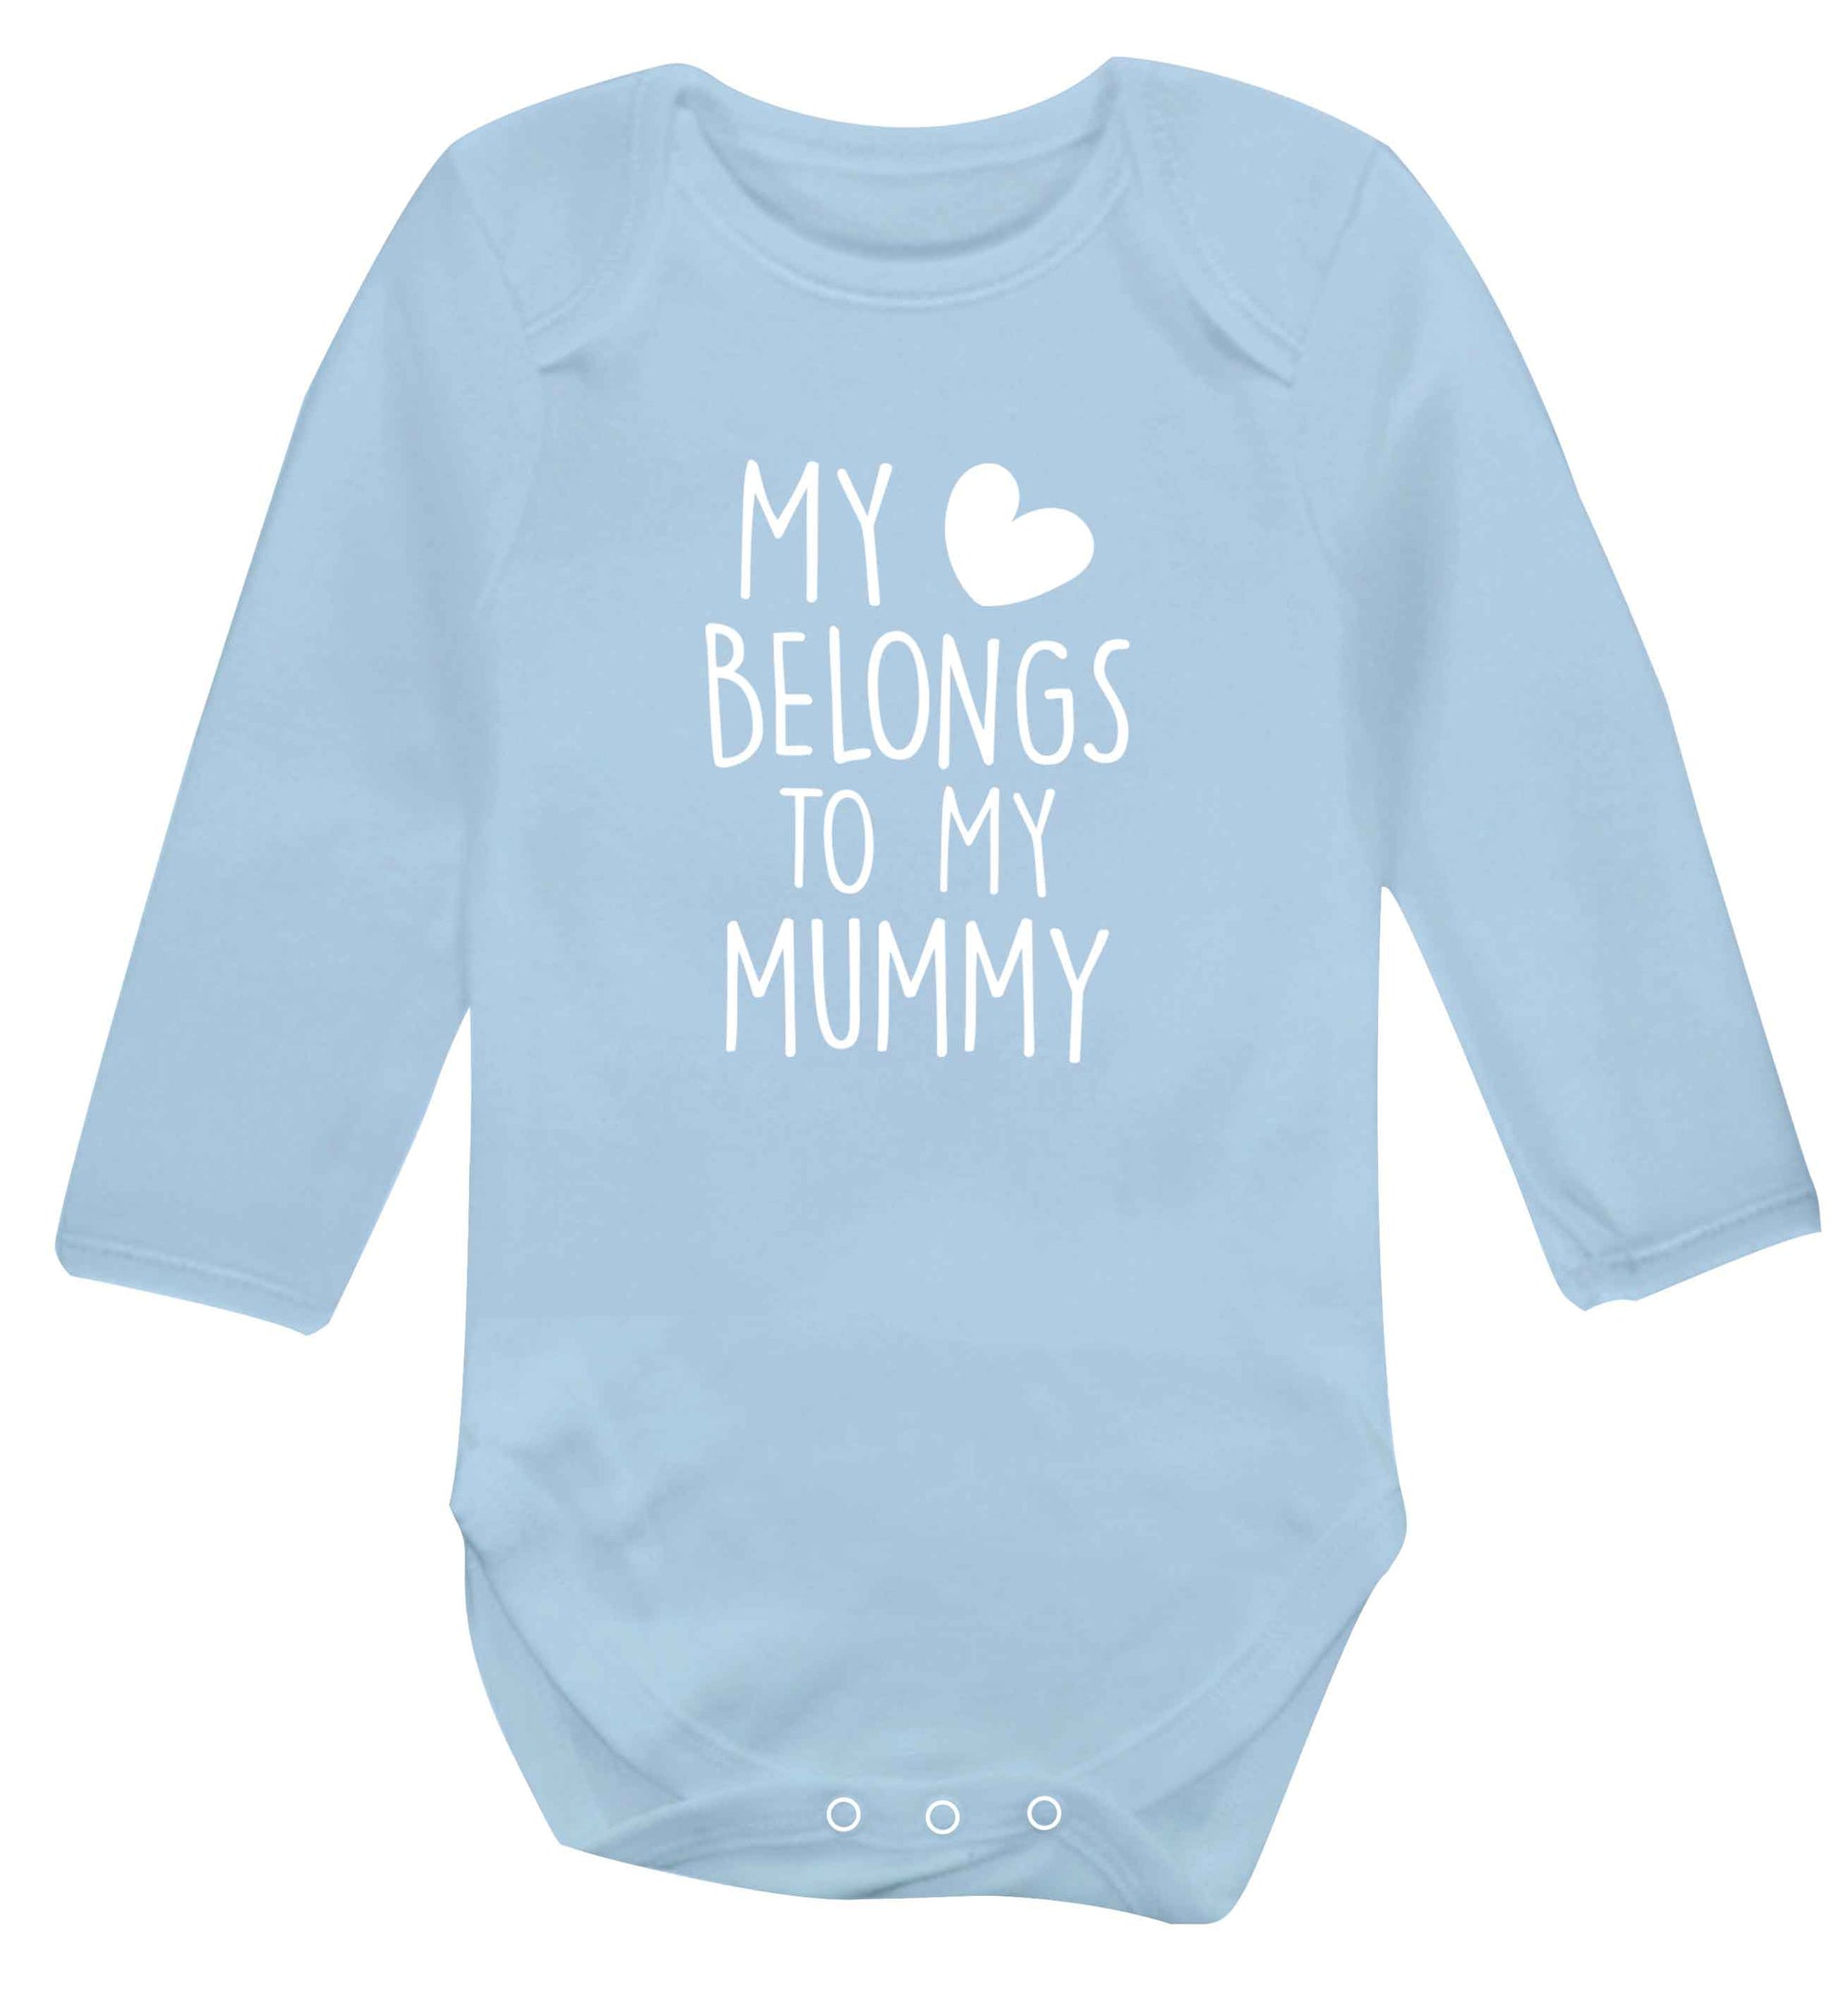 My heart belongs to my mummy baby vest long sleeved pale blue 6-12 months